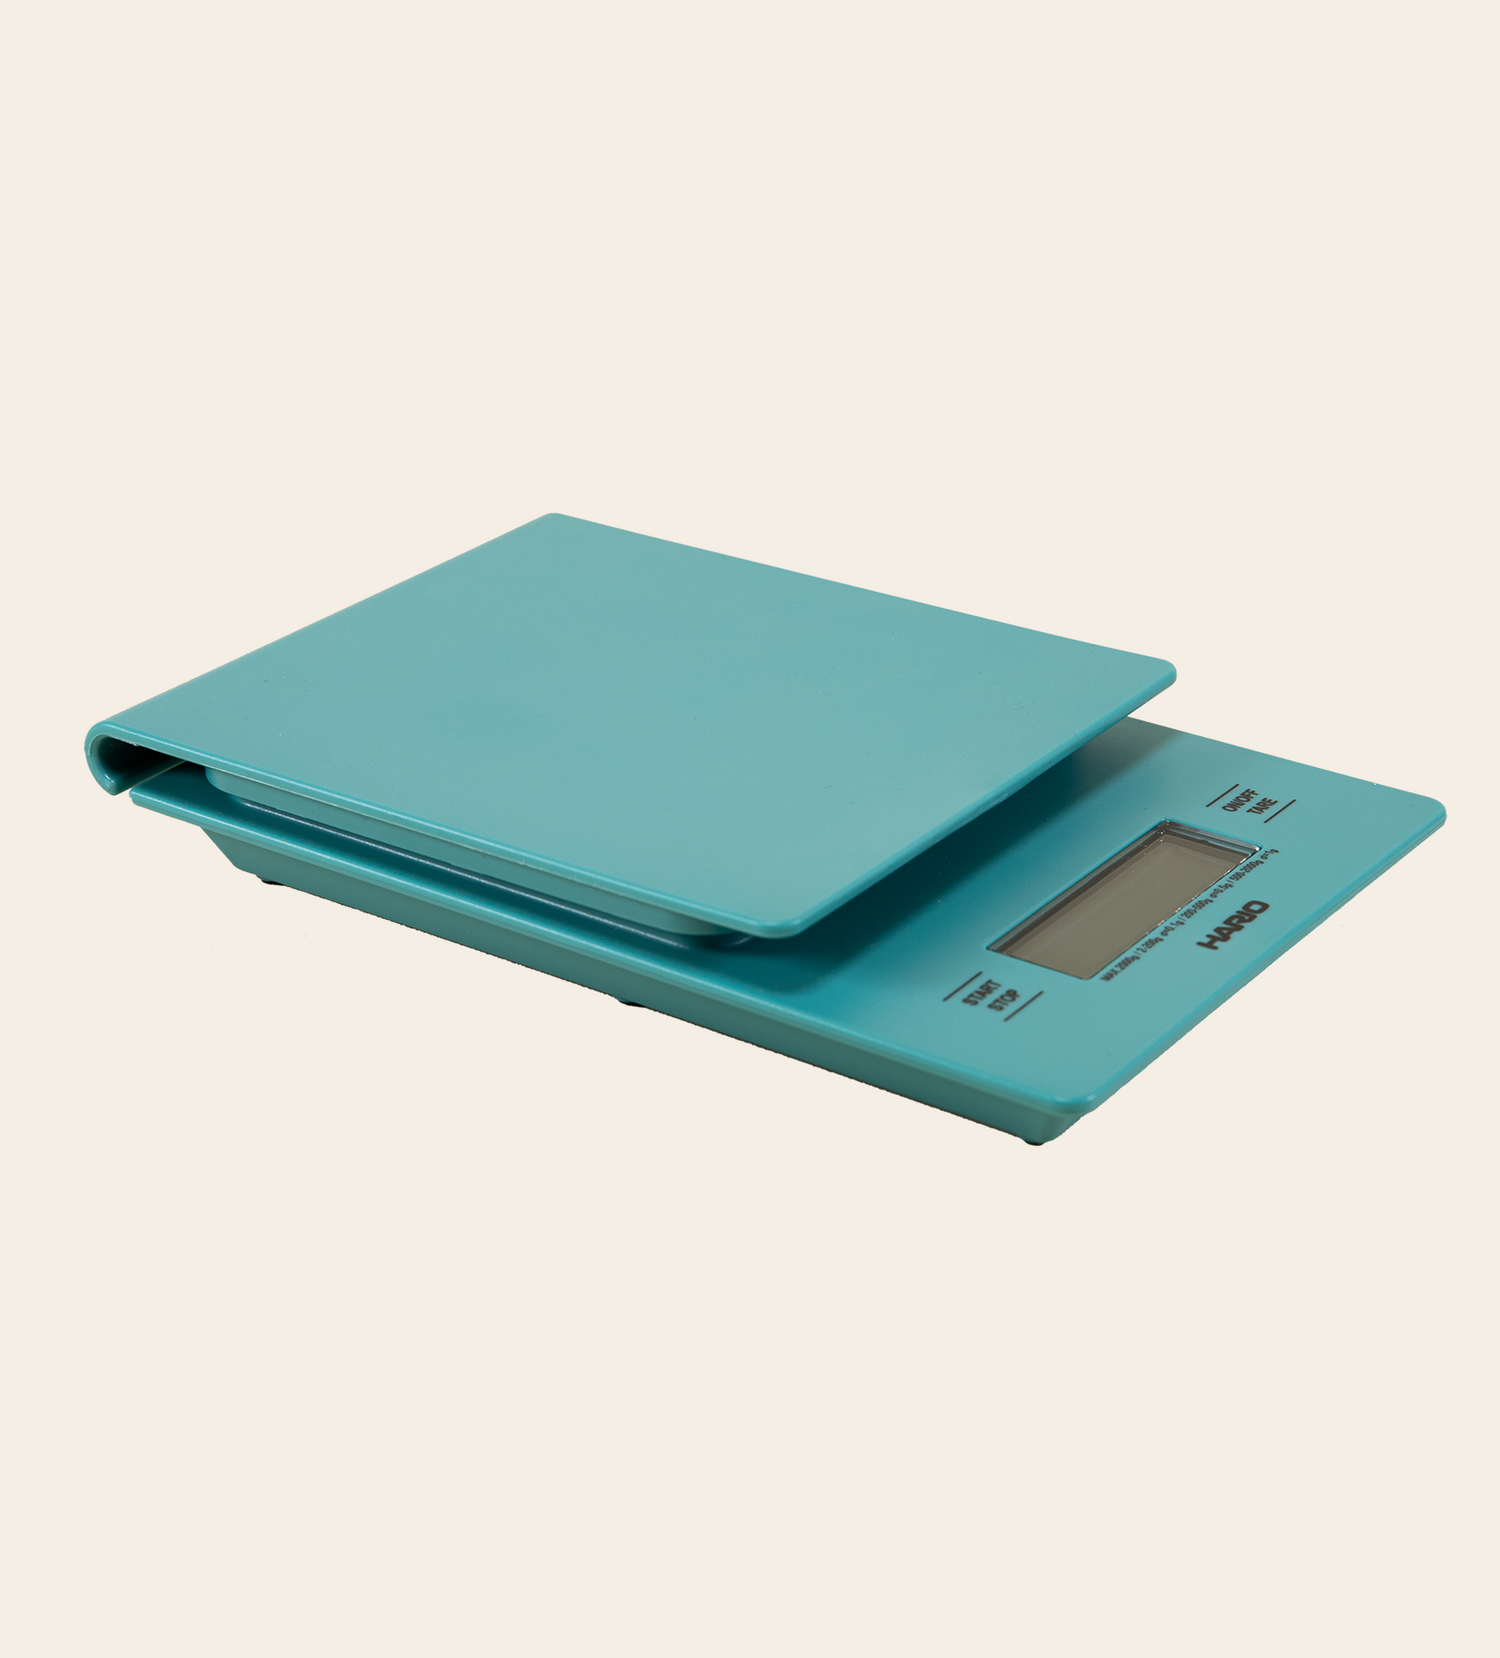 V60 Drip Scale Turquoise – Hario USA